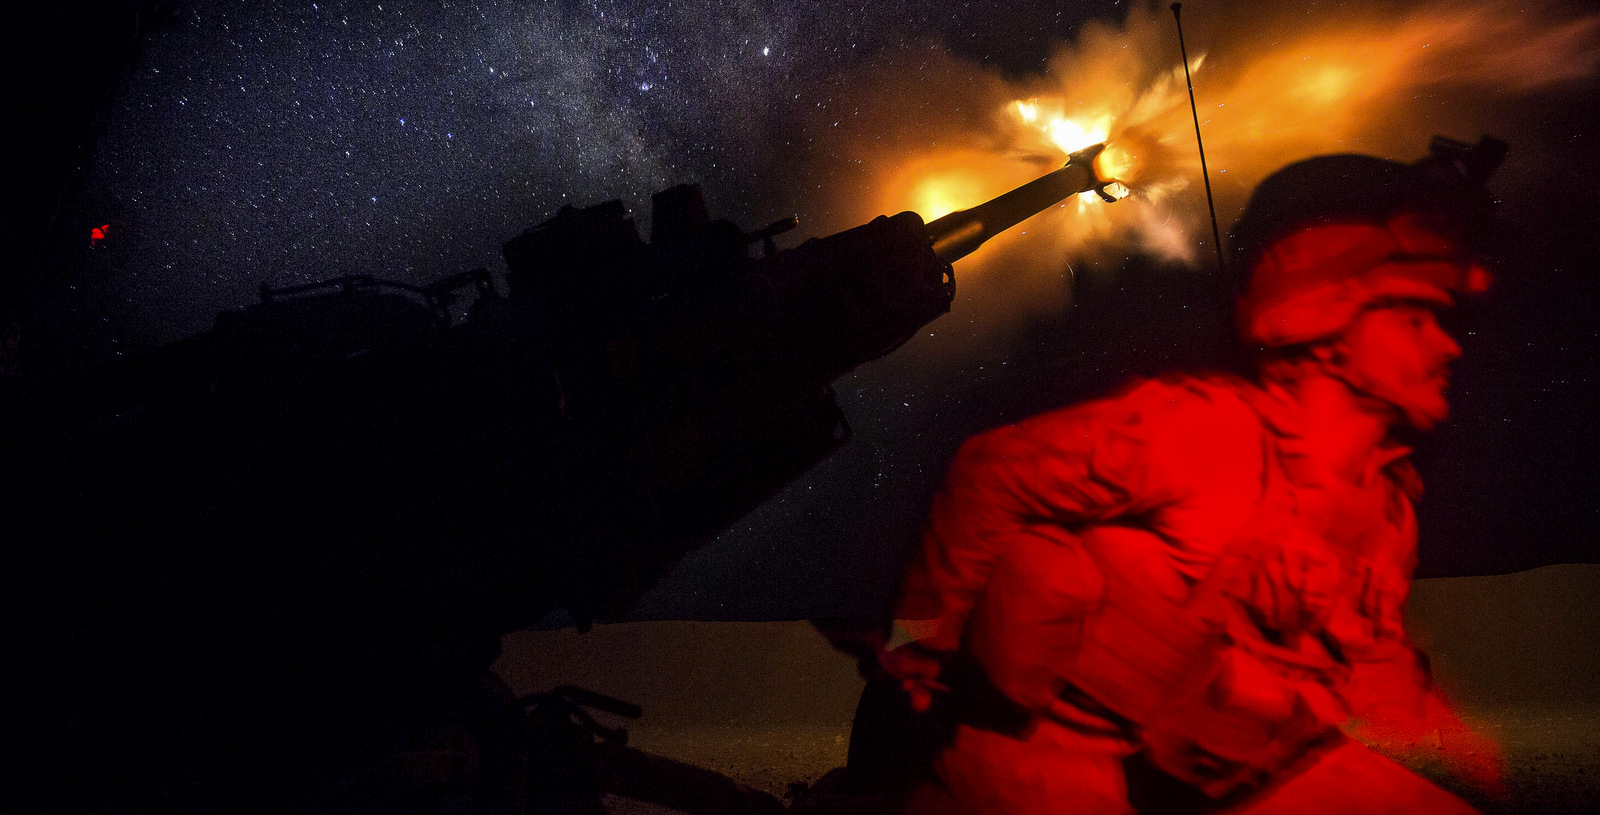 A U.S. Marine fires a howitzer in the early morning in Syria in support of the SDF (Syrian Democratic Forces), June 3, 2017. (Marines Corps Photo)